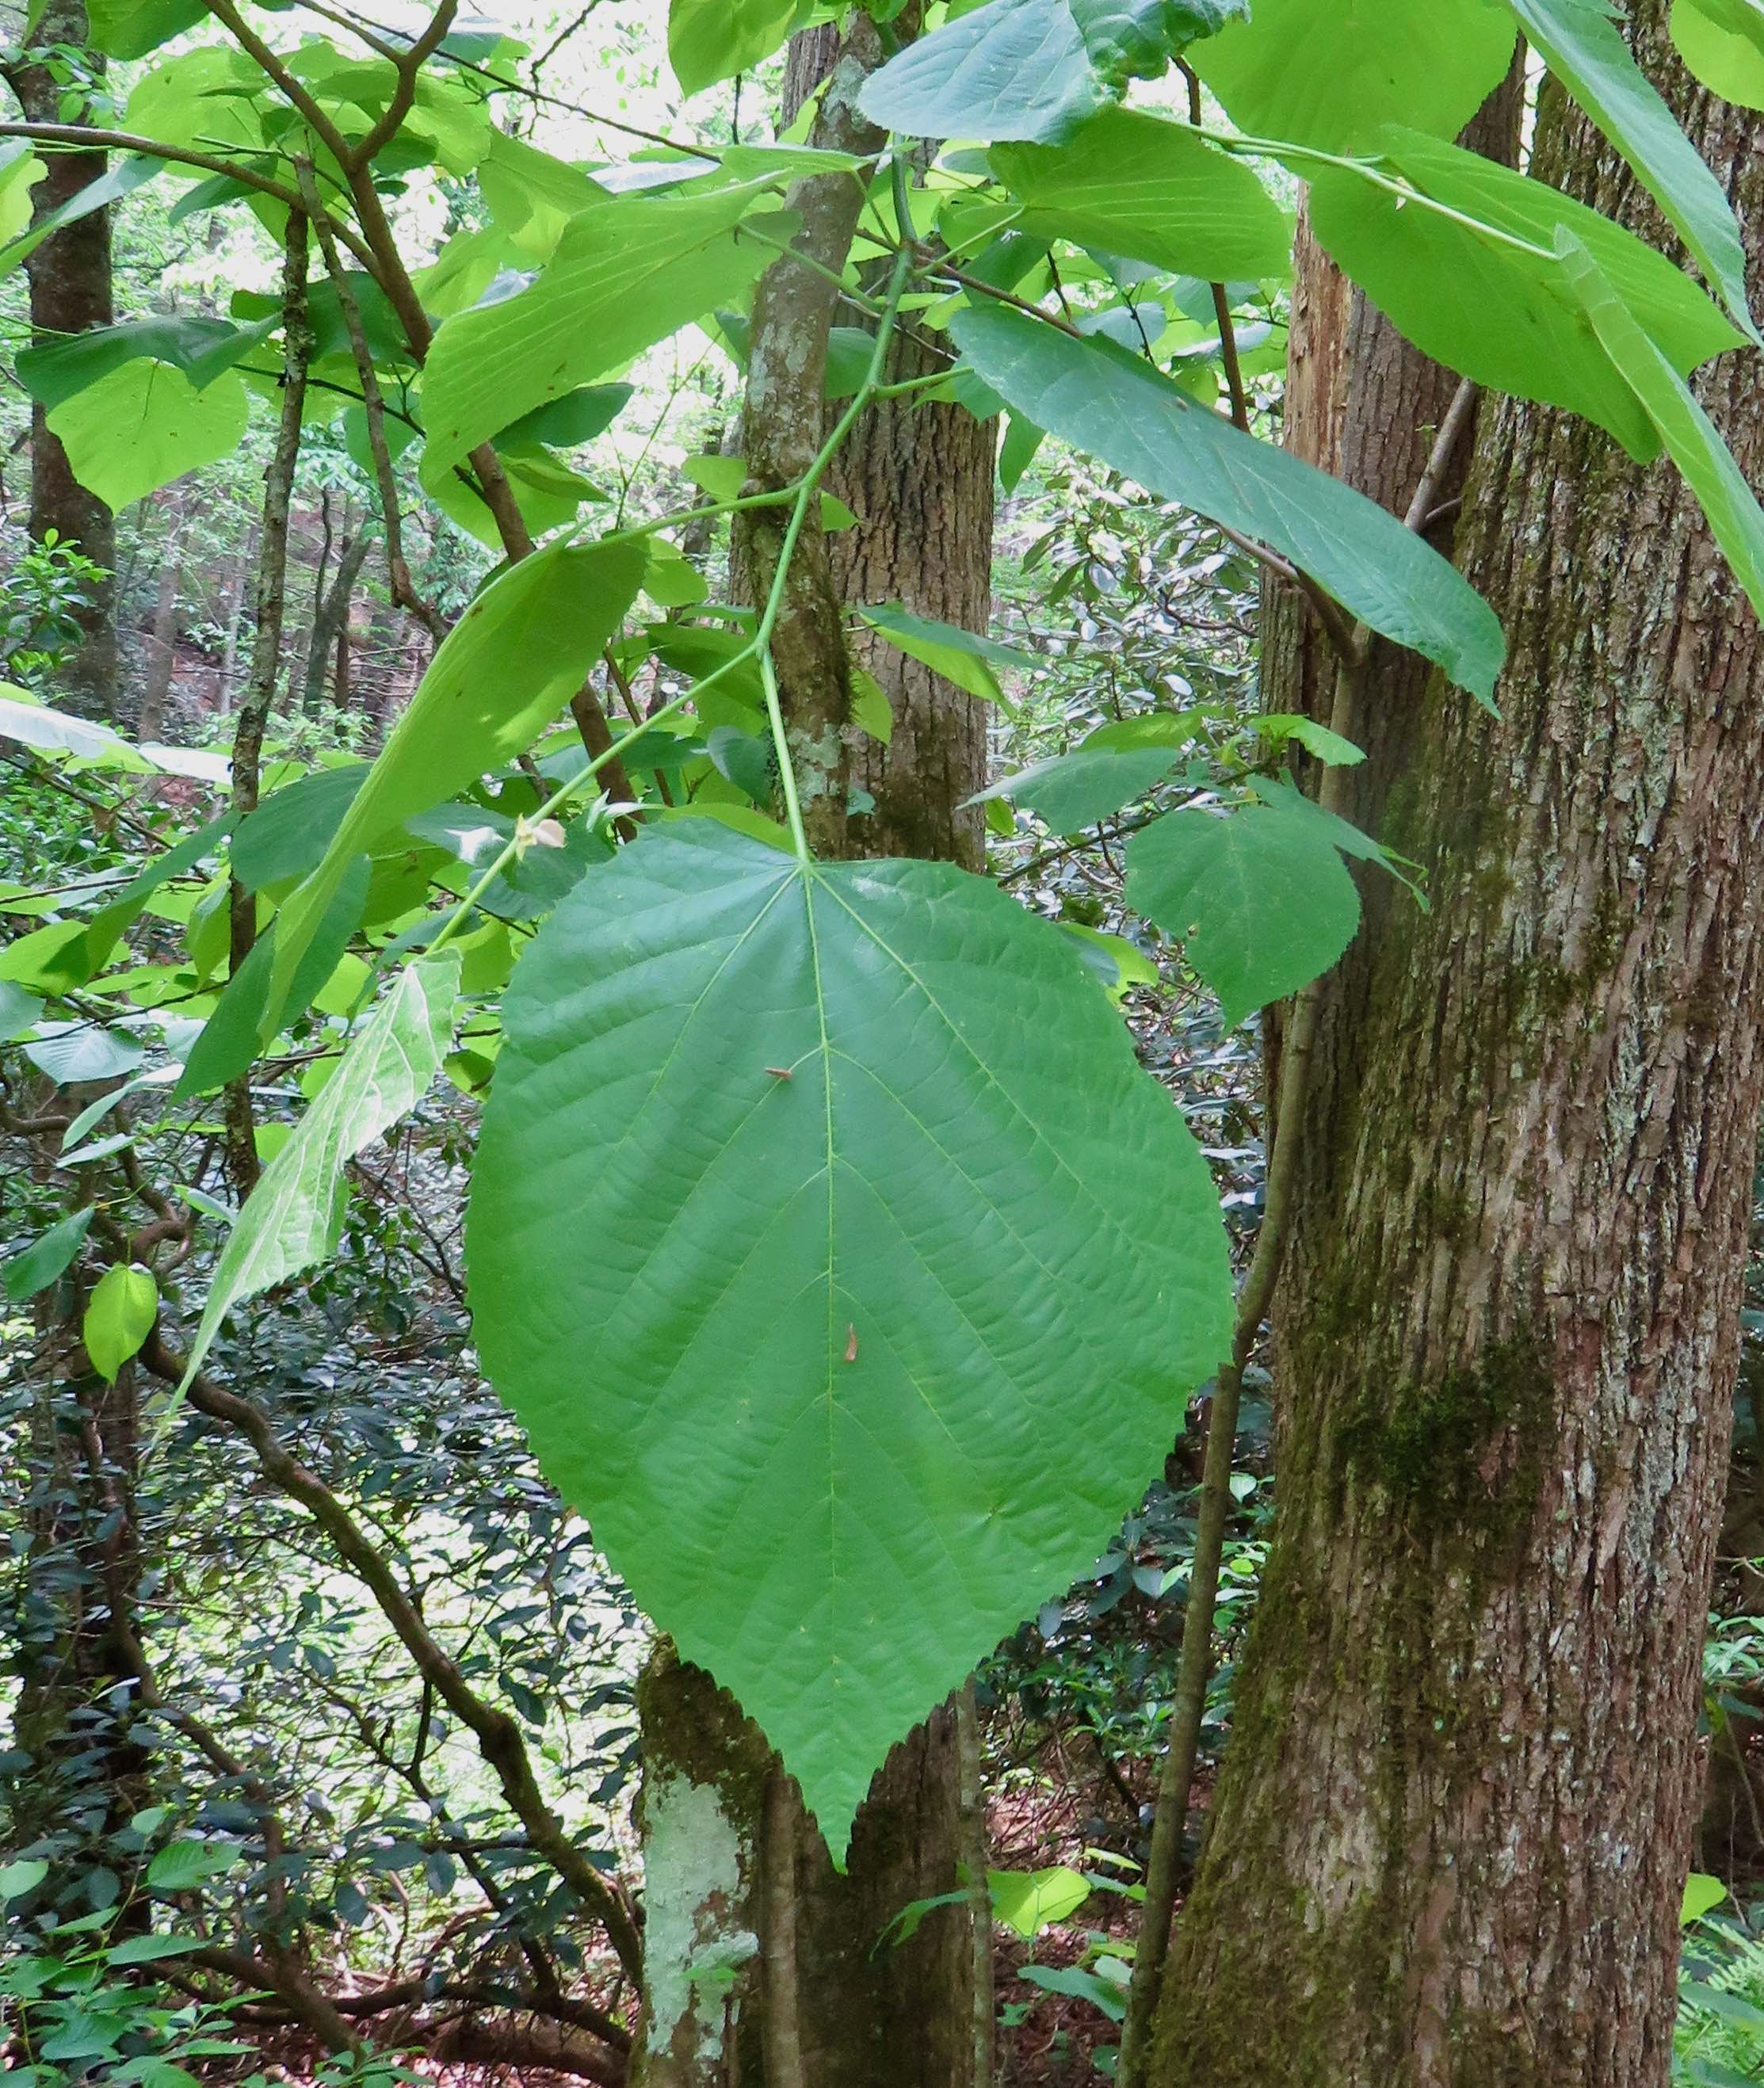 The Scientific Name is Tilia americana var. heterophylla. You will likely hear them called Mountain Basswood, White Basswood. This picture shows the Alternate, broad, heart-shaped leaves that are lopsided at the base (assuming this is var. heterophylla based on the county occurrence records in Vascular Plants of NC) of Tilia americana var. heterophylla